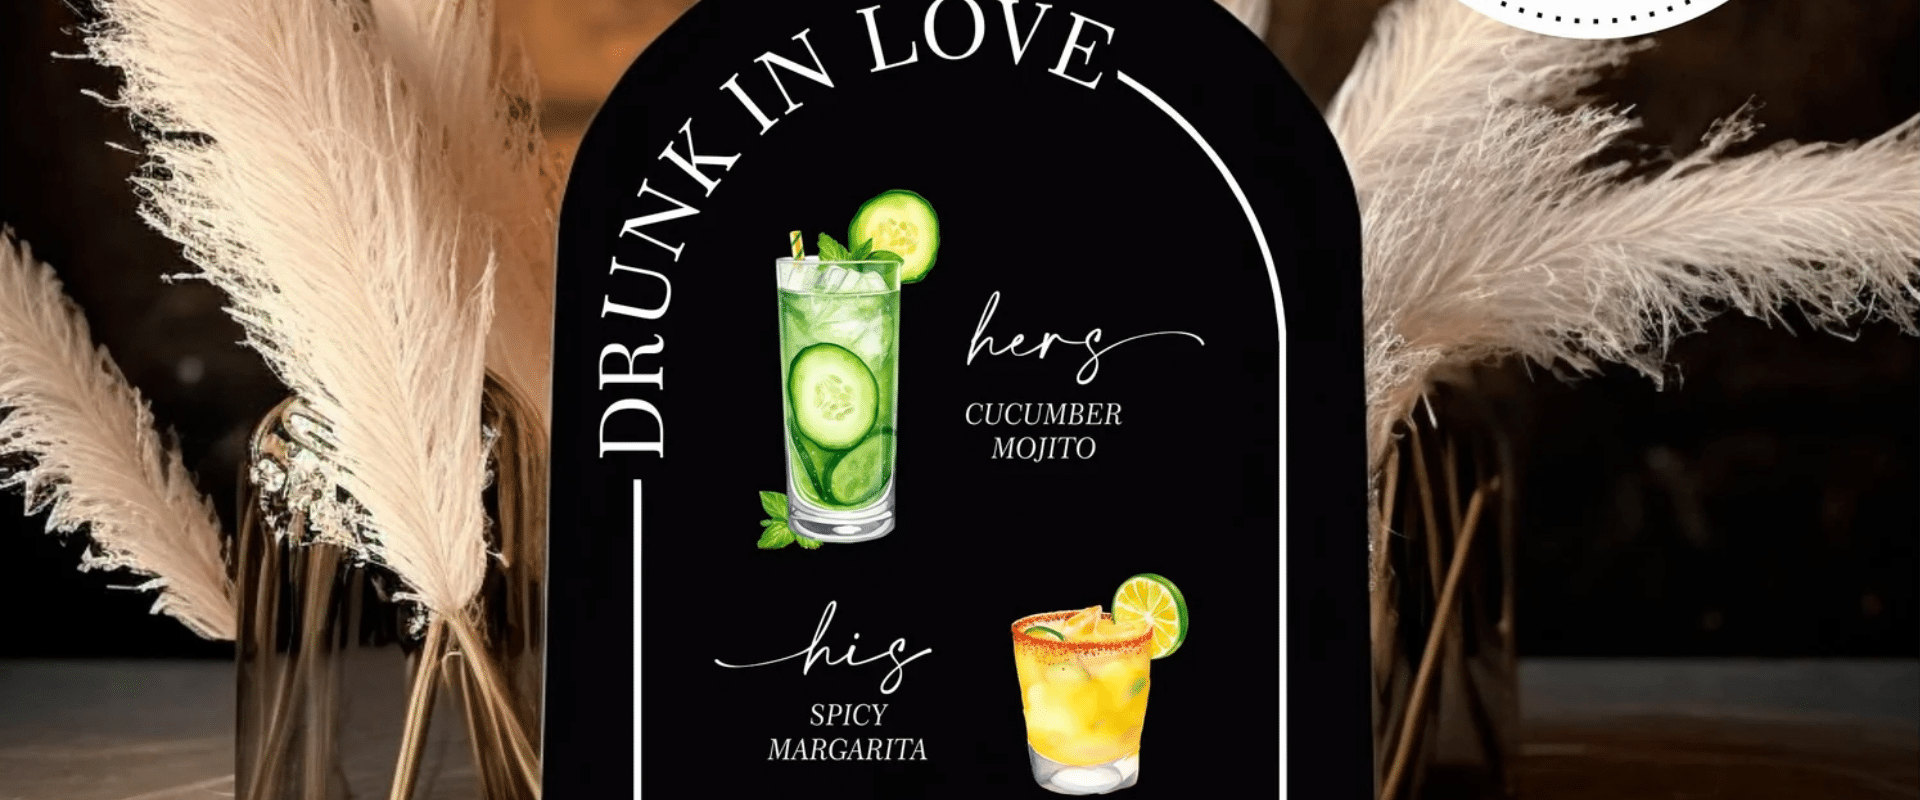 A drink in love sign with different drinks on it.